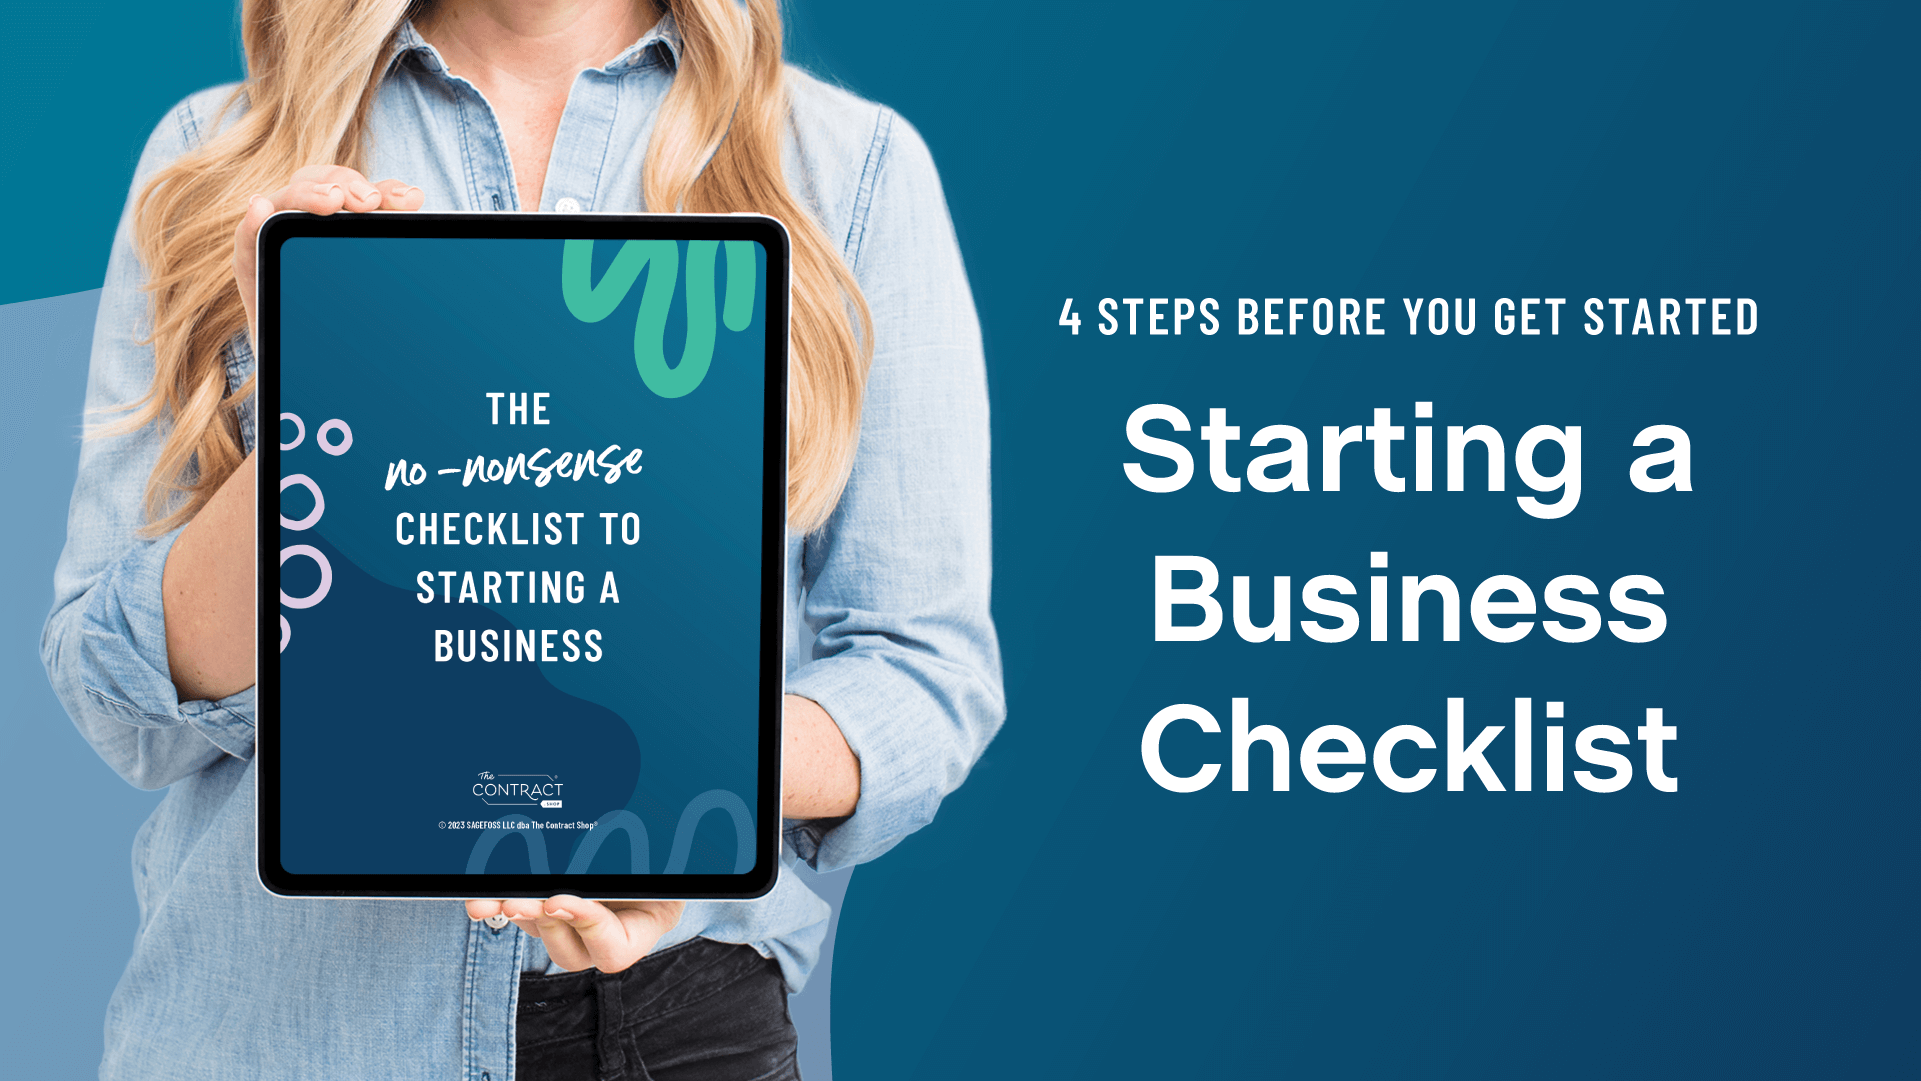 Starting a Business Checklist: 4 Steps Before You Get Started